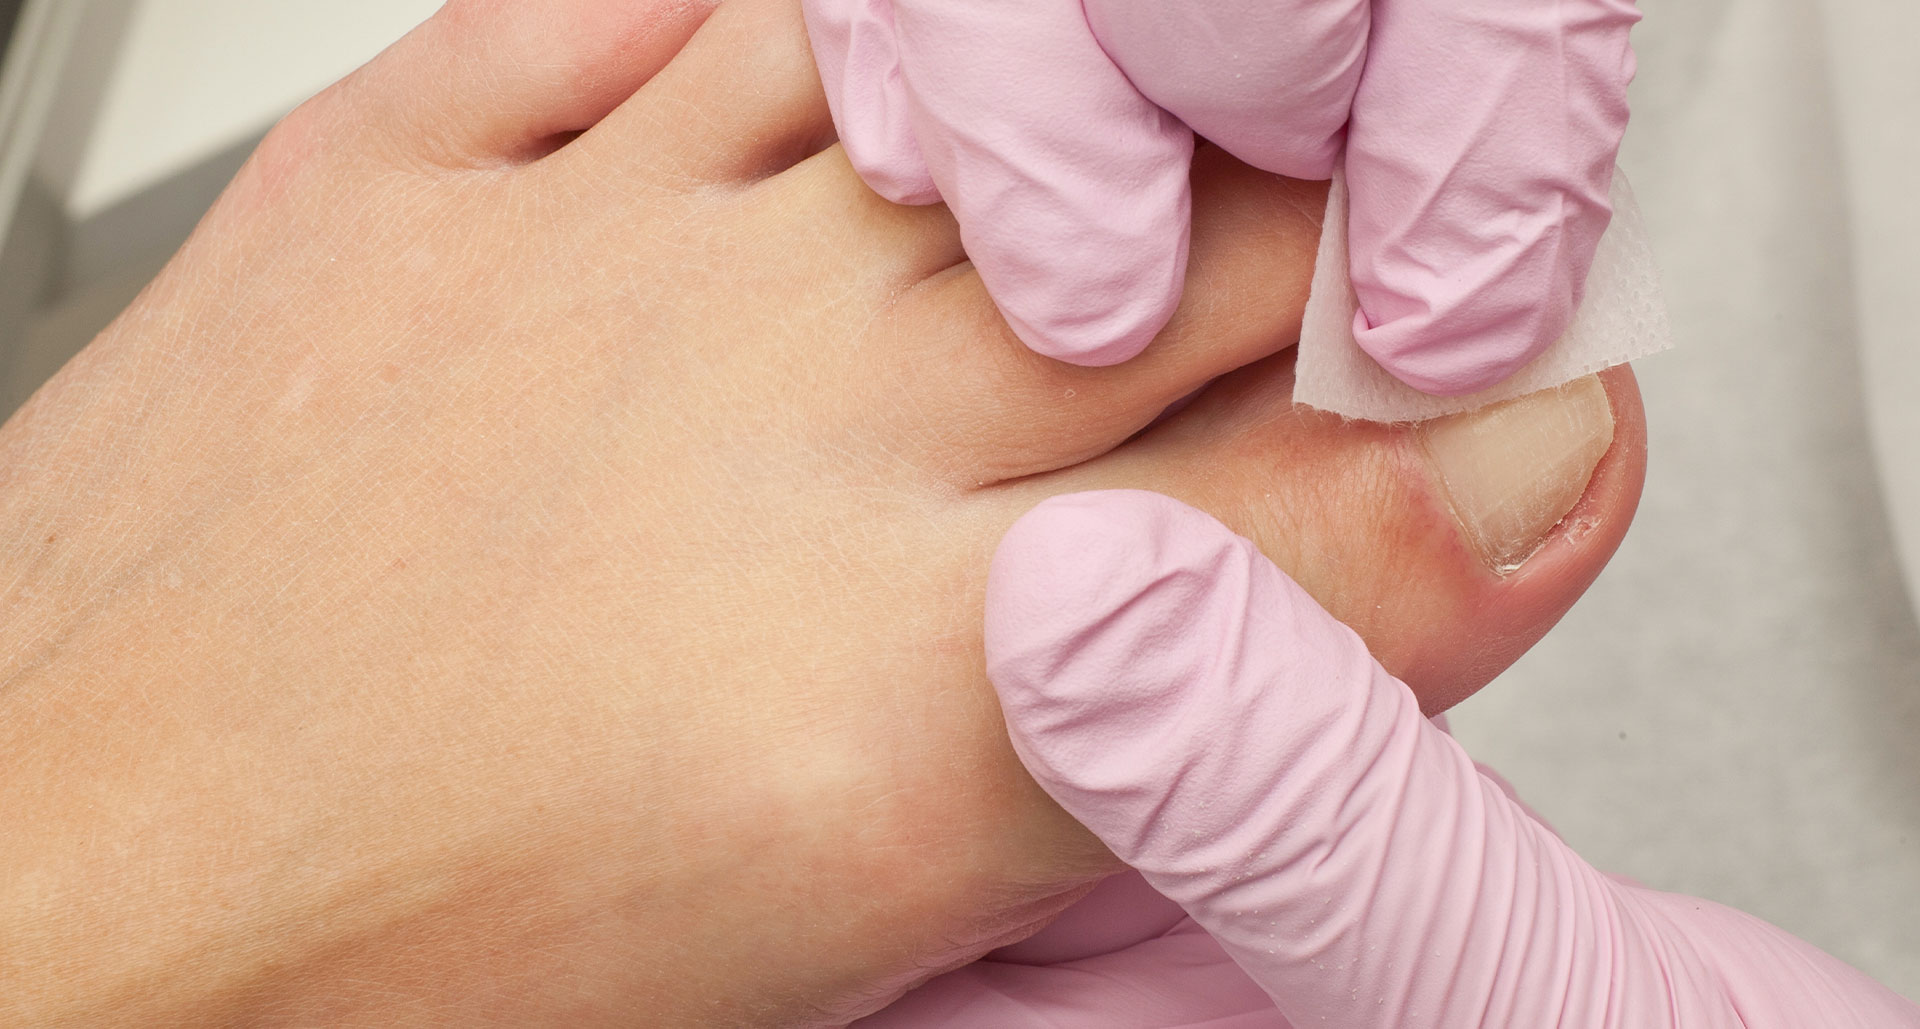 Fungal Nails Treatment in Johns Creek